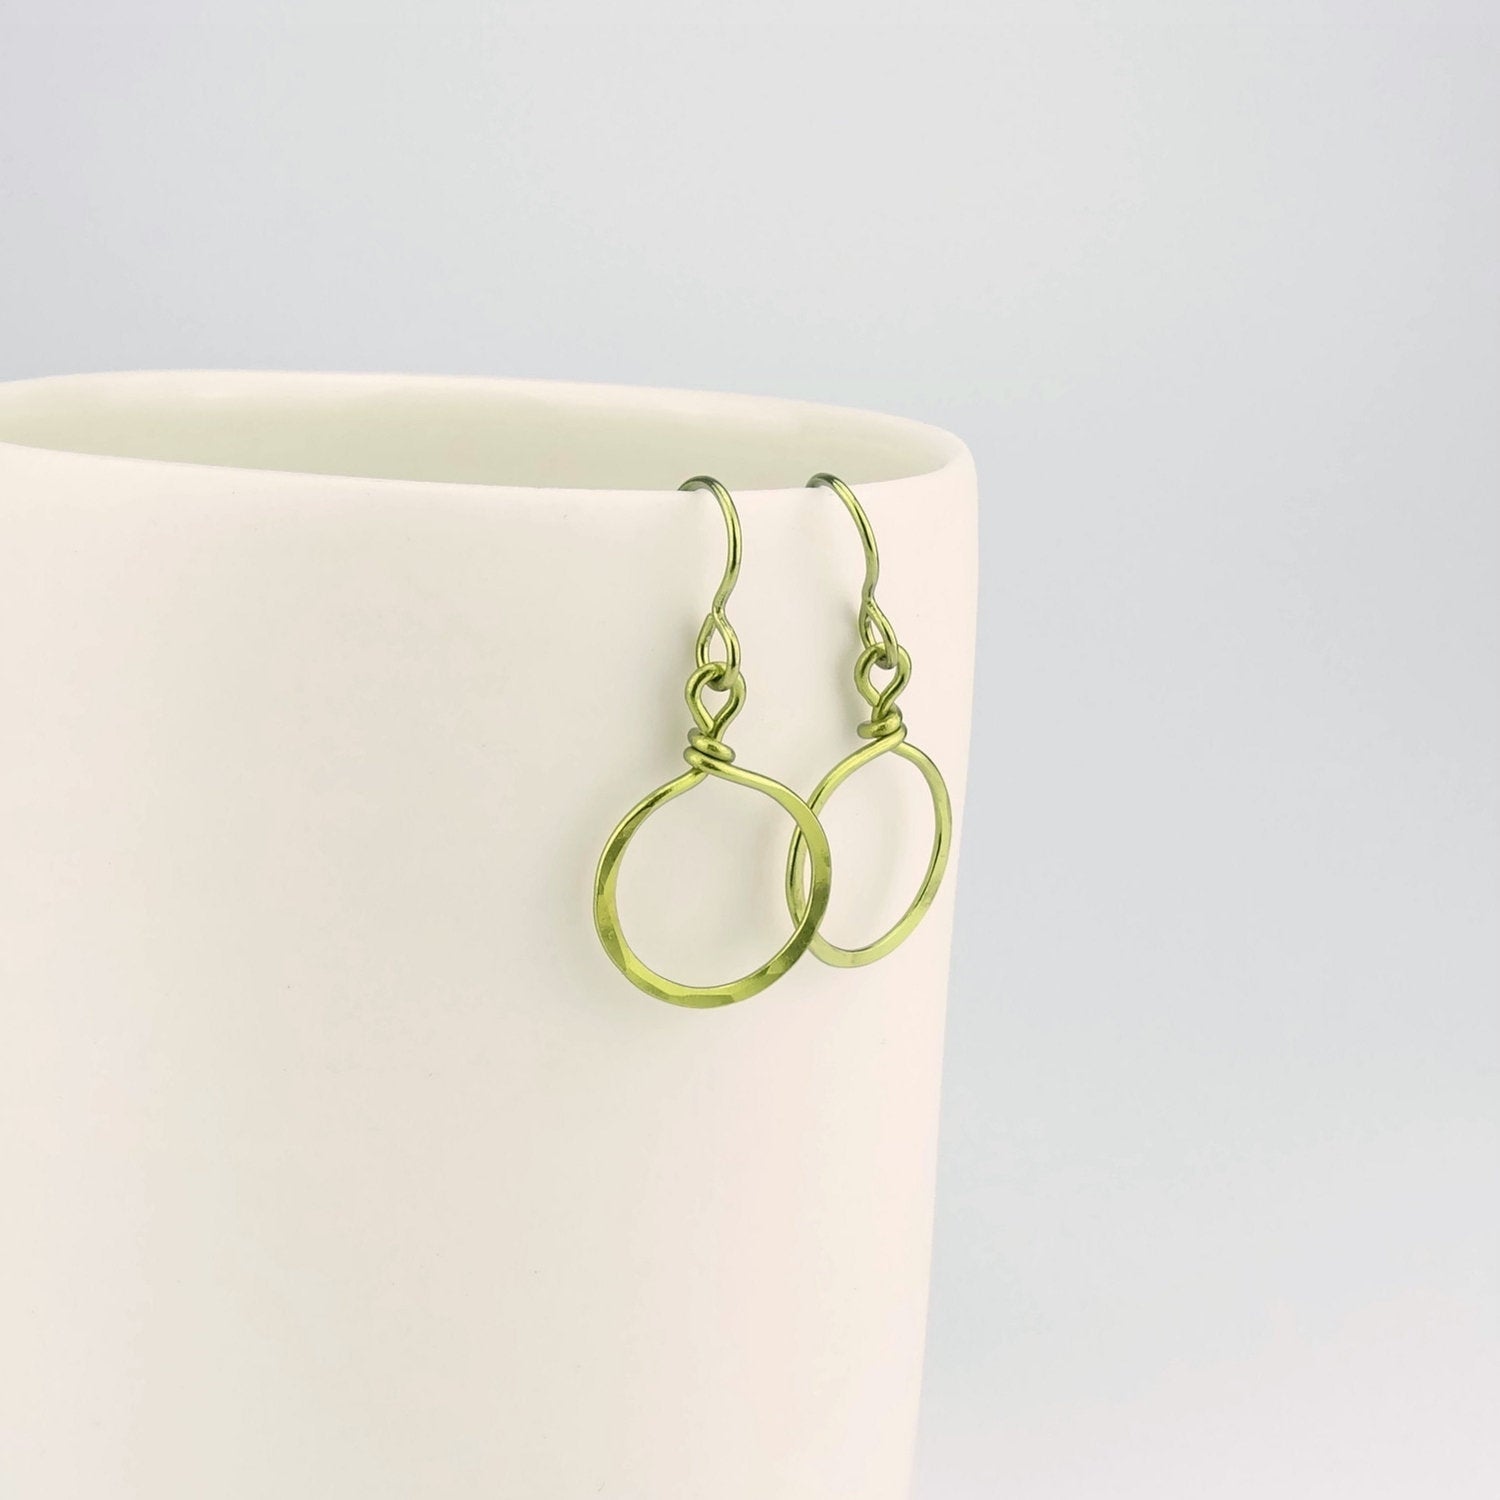 Small Gold-color Hammered Dangle Hoop Earrings, Hypoallergenic Nickel Free Circles, Gold Anodized Niobium Earrings for Sensitive Ears